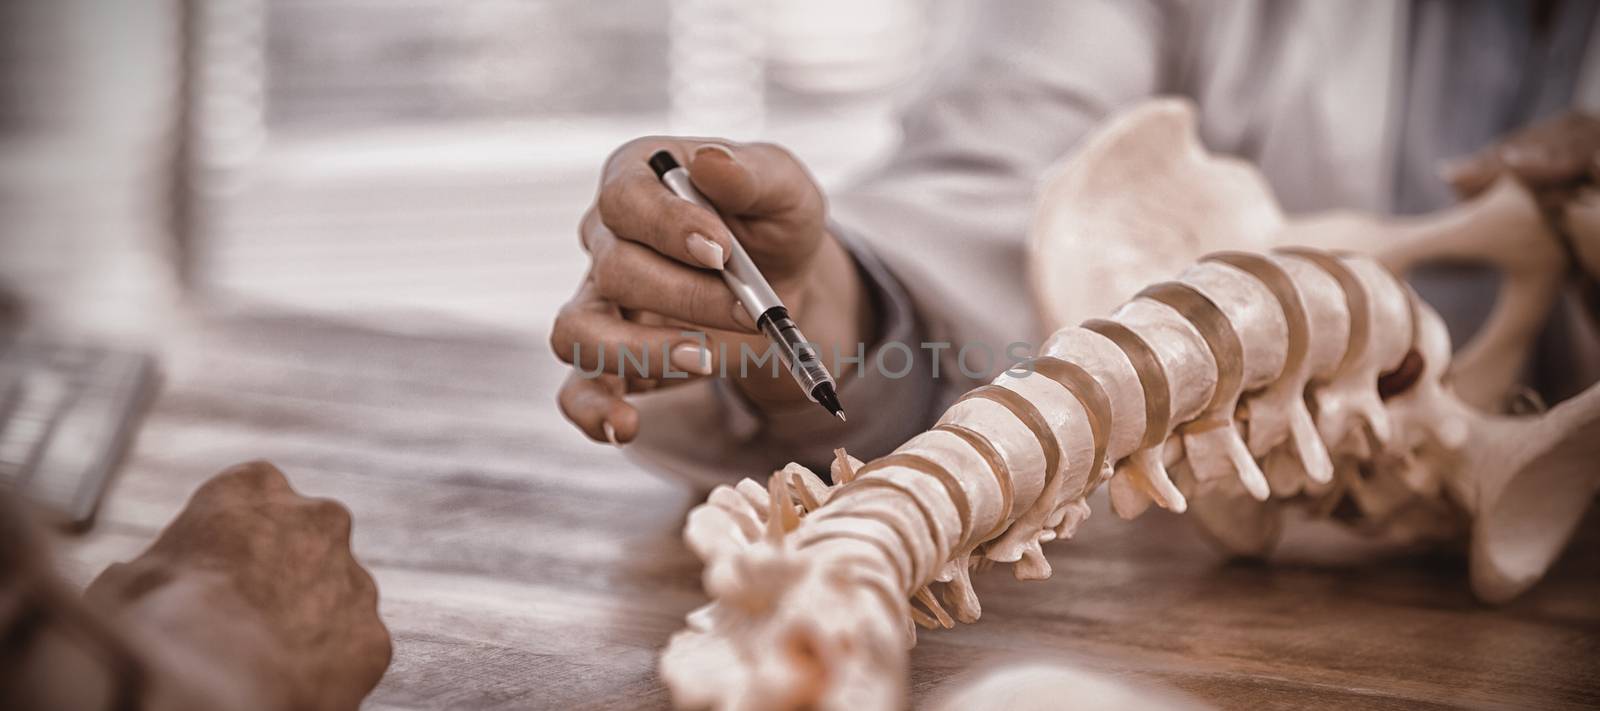 Doctor explaining anatomical spine to patient in medical office